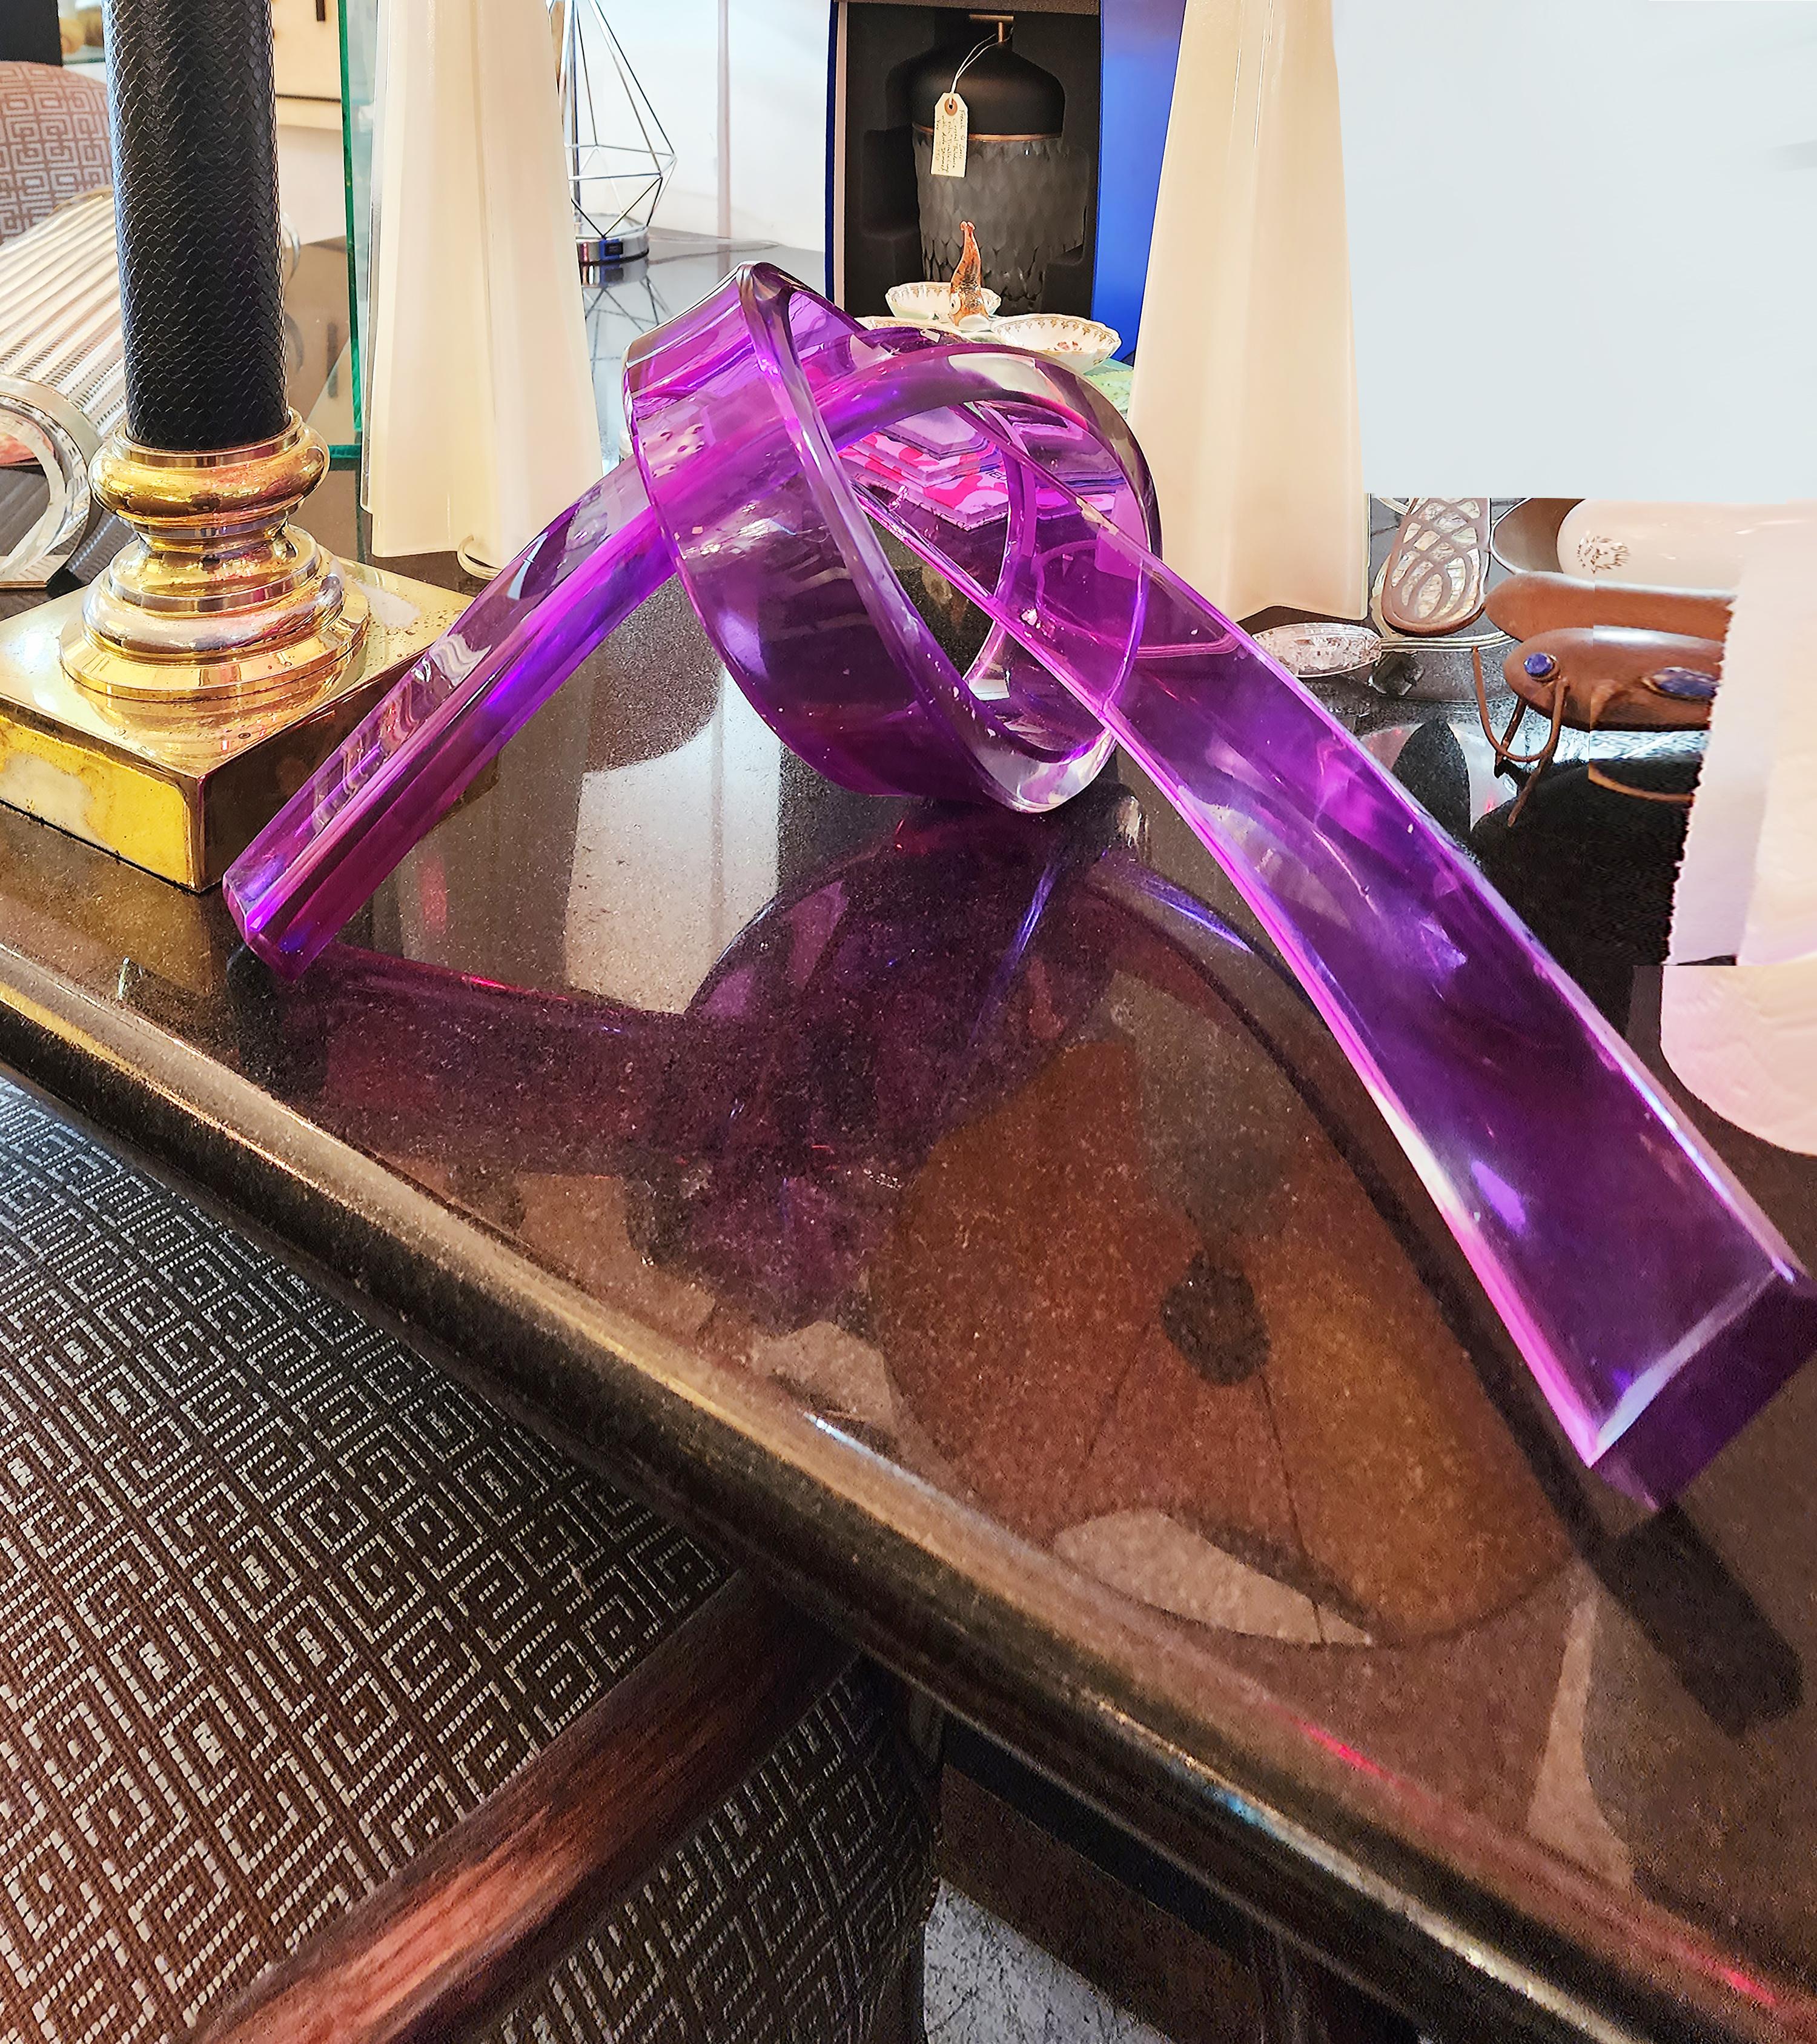 Iconic Design Thick Twisted Abstract Lucite Ribbon Sculpture

Offered for sale is an iconic design thick, twisted purple lucite ribbon sculpture.
Lucite is bi-color clear and purple and 1